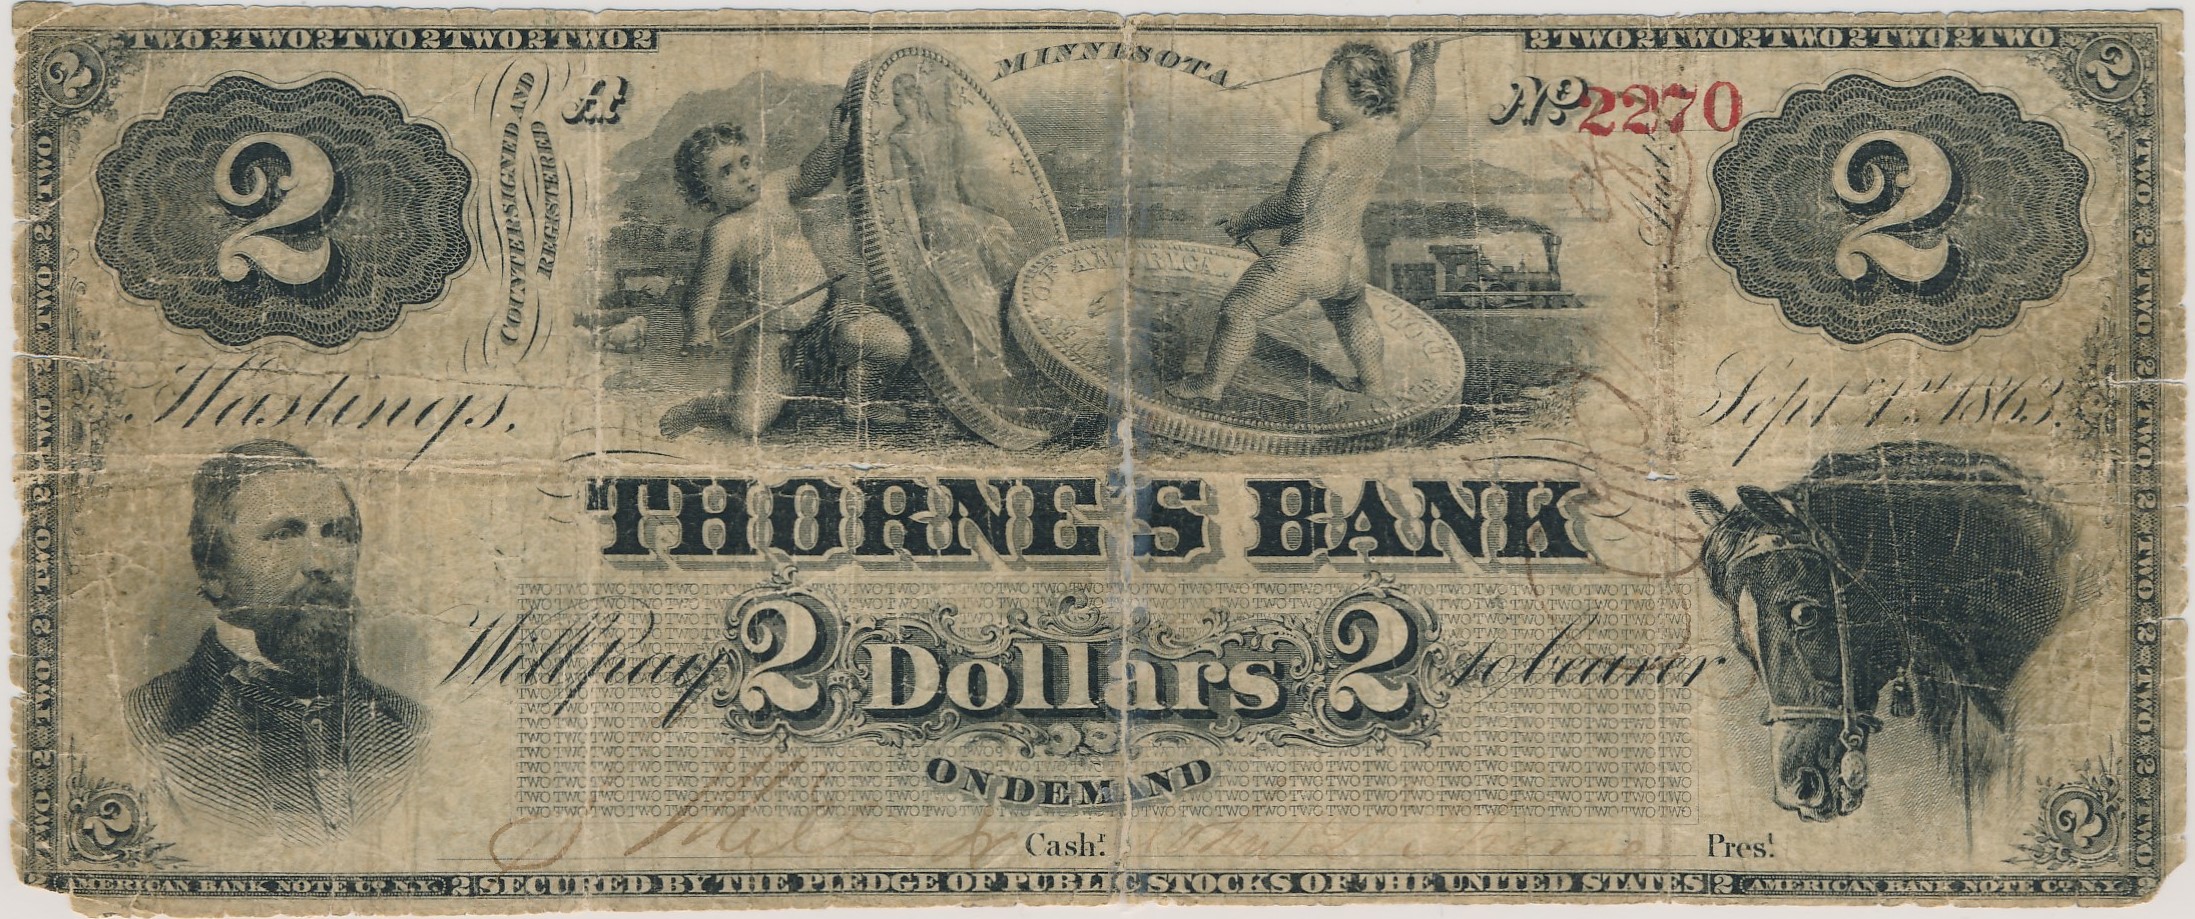 $2 Thorne's Bank